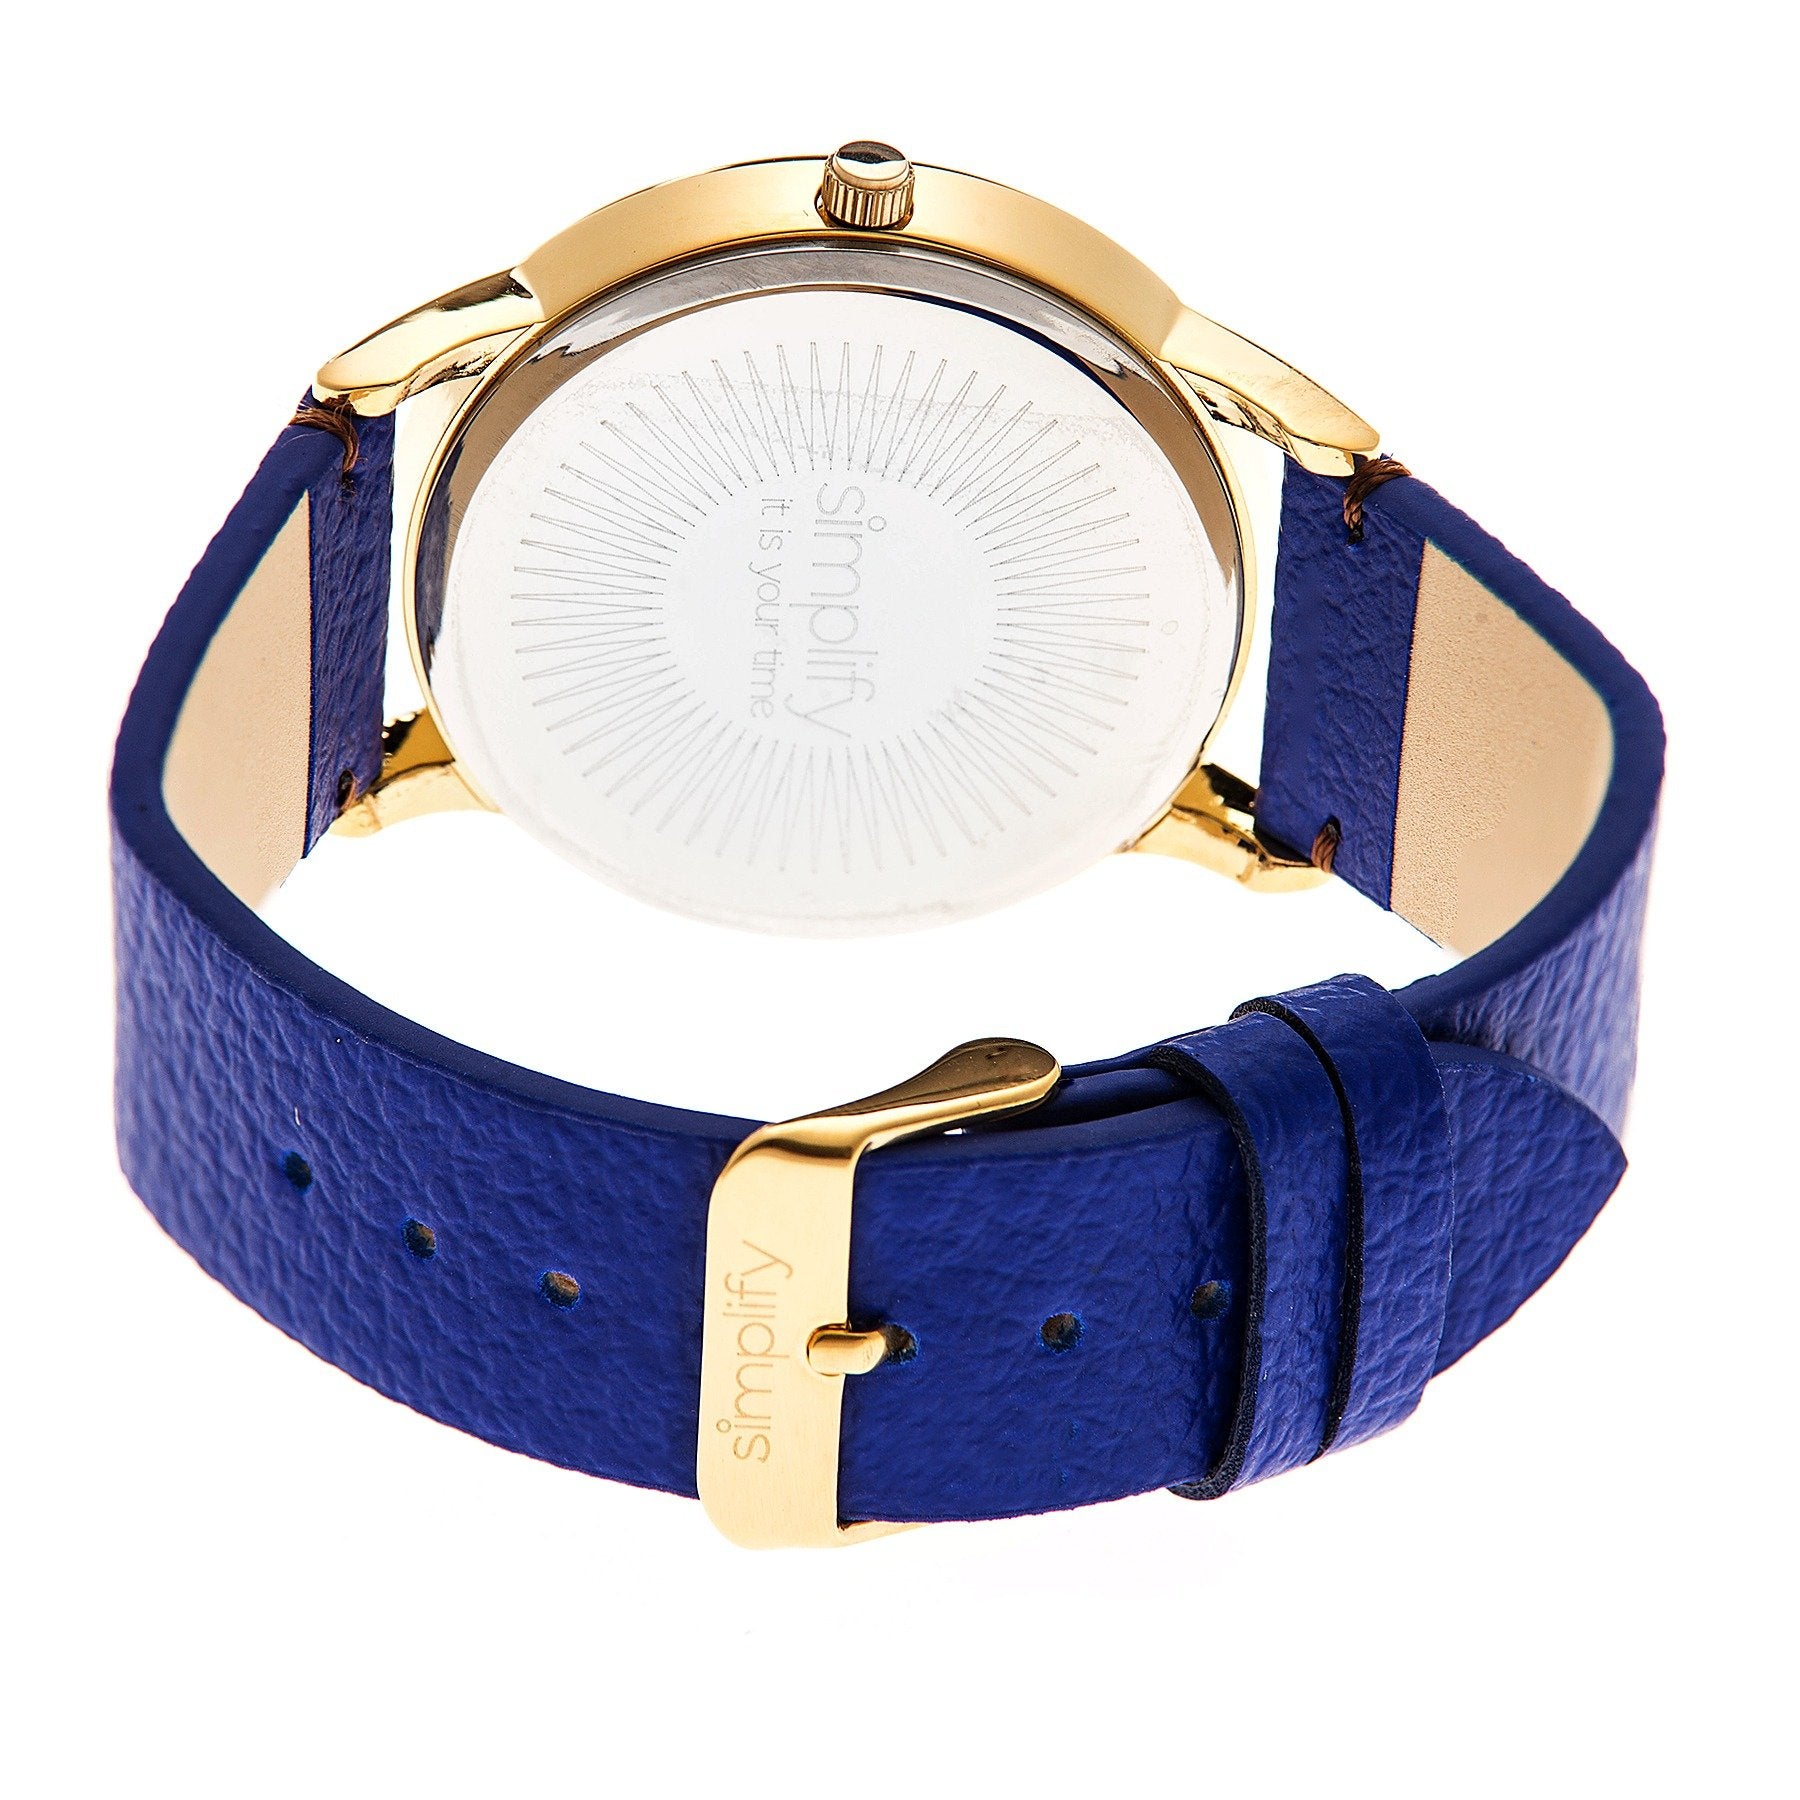 Simplify The 2800 Leather-Band Watch - Gold/Blue - SIM2804